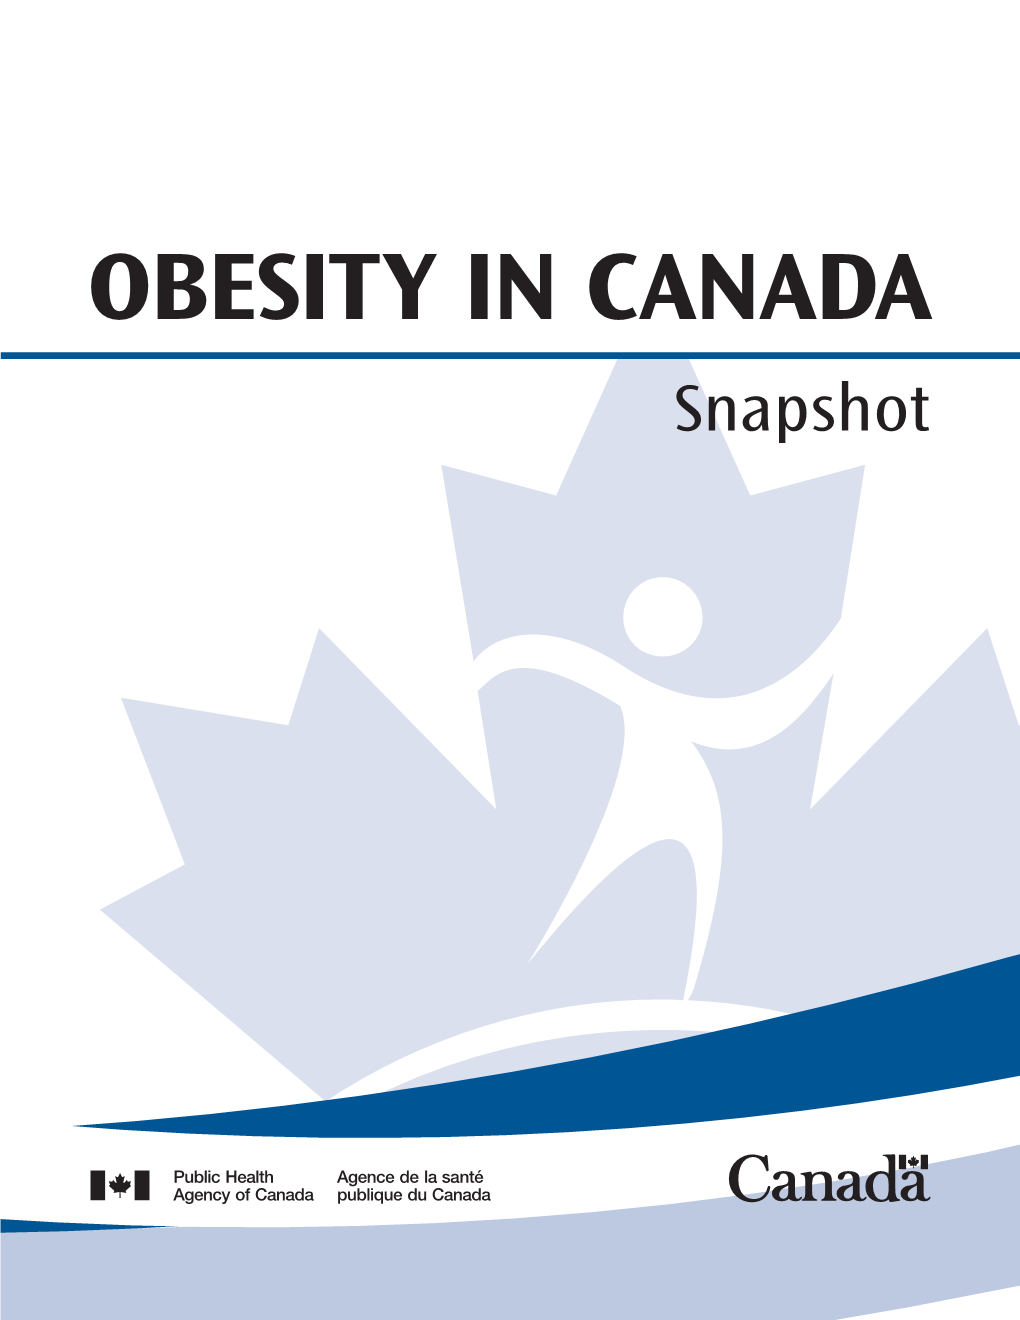 OBESITY in CANADA Snapshot to Promote and Protect the Health of Canadians Through Leadership, Partnership, Innovation and Action in Public Health